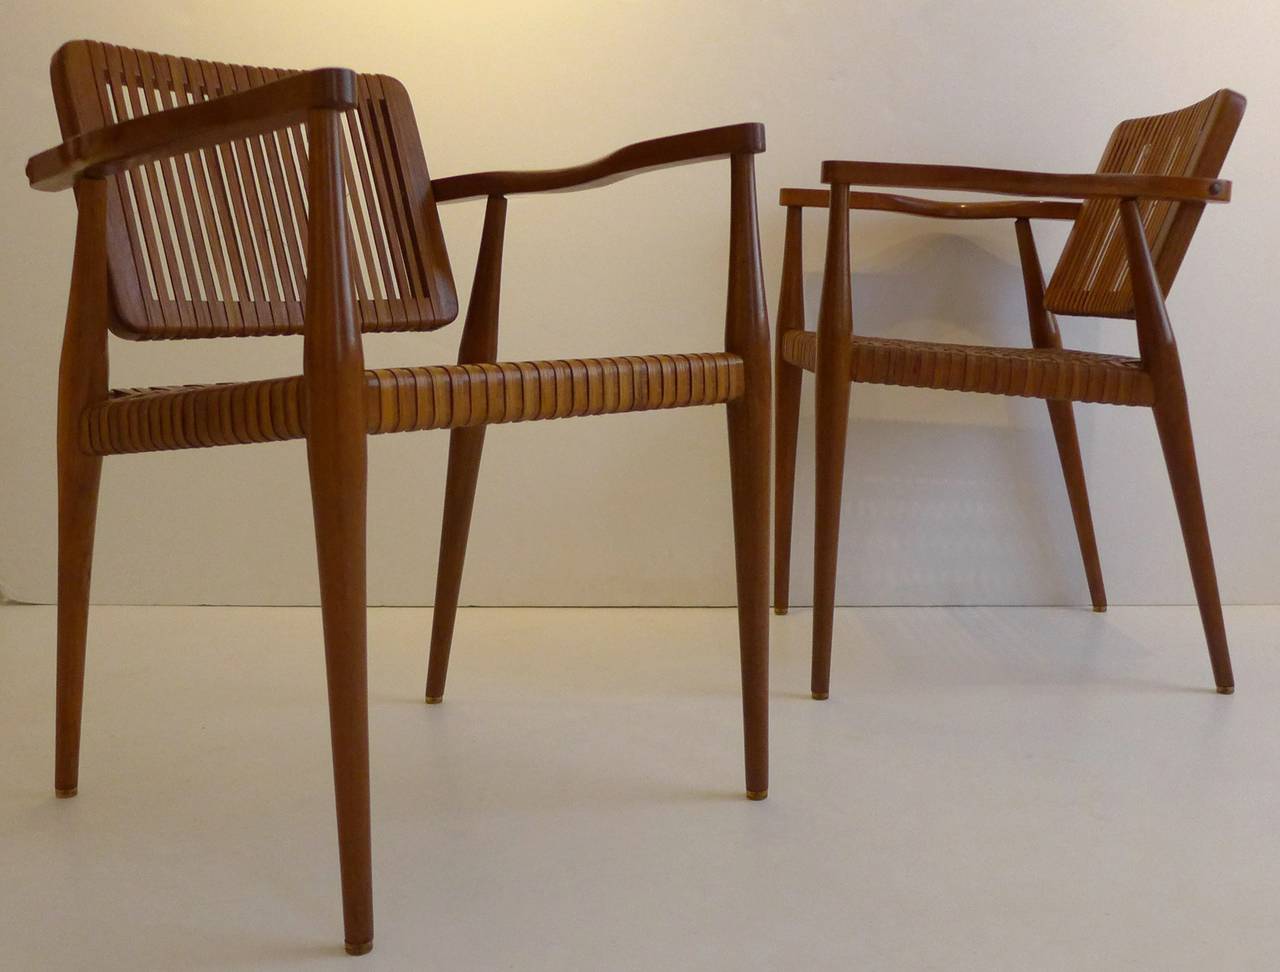 Unusual and striking set of four armchairs in walnut with sinuous arms, pivoting back rests, and woven rattan seats. Designed by Marcel La Riviere and made by his company, La Riviere, Inc, for Ficks Reed. Likely only produced for a few years in the